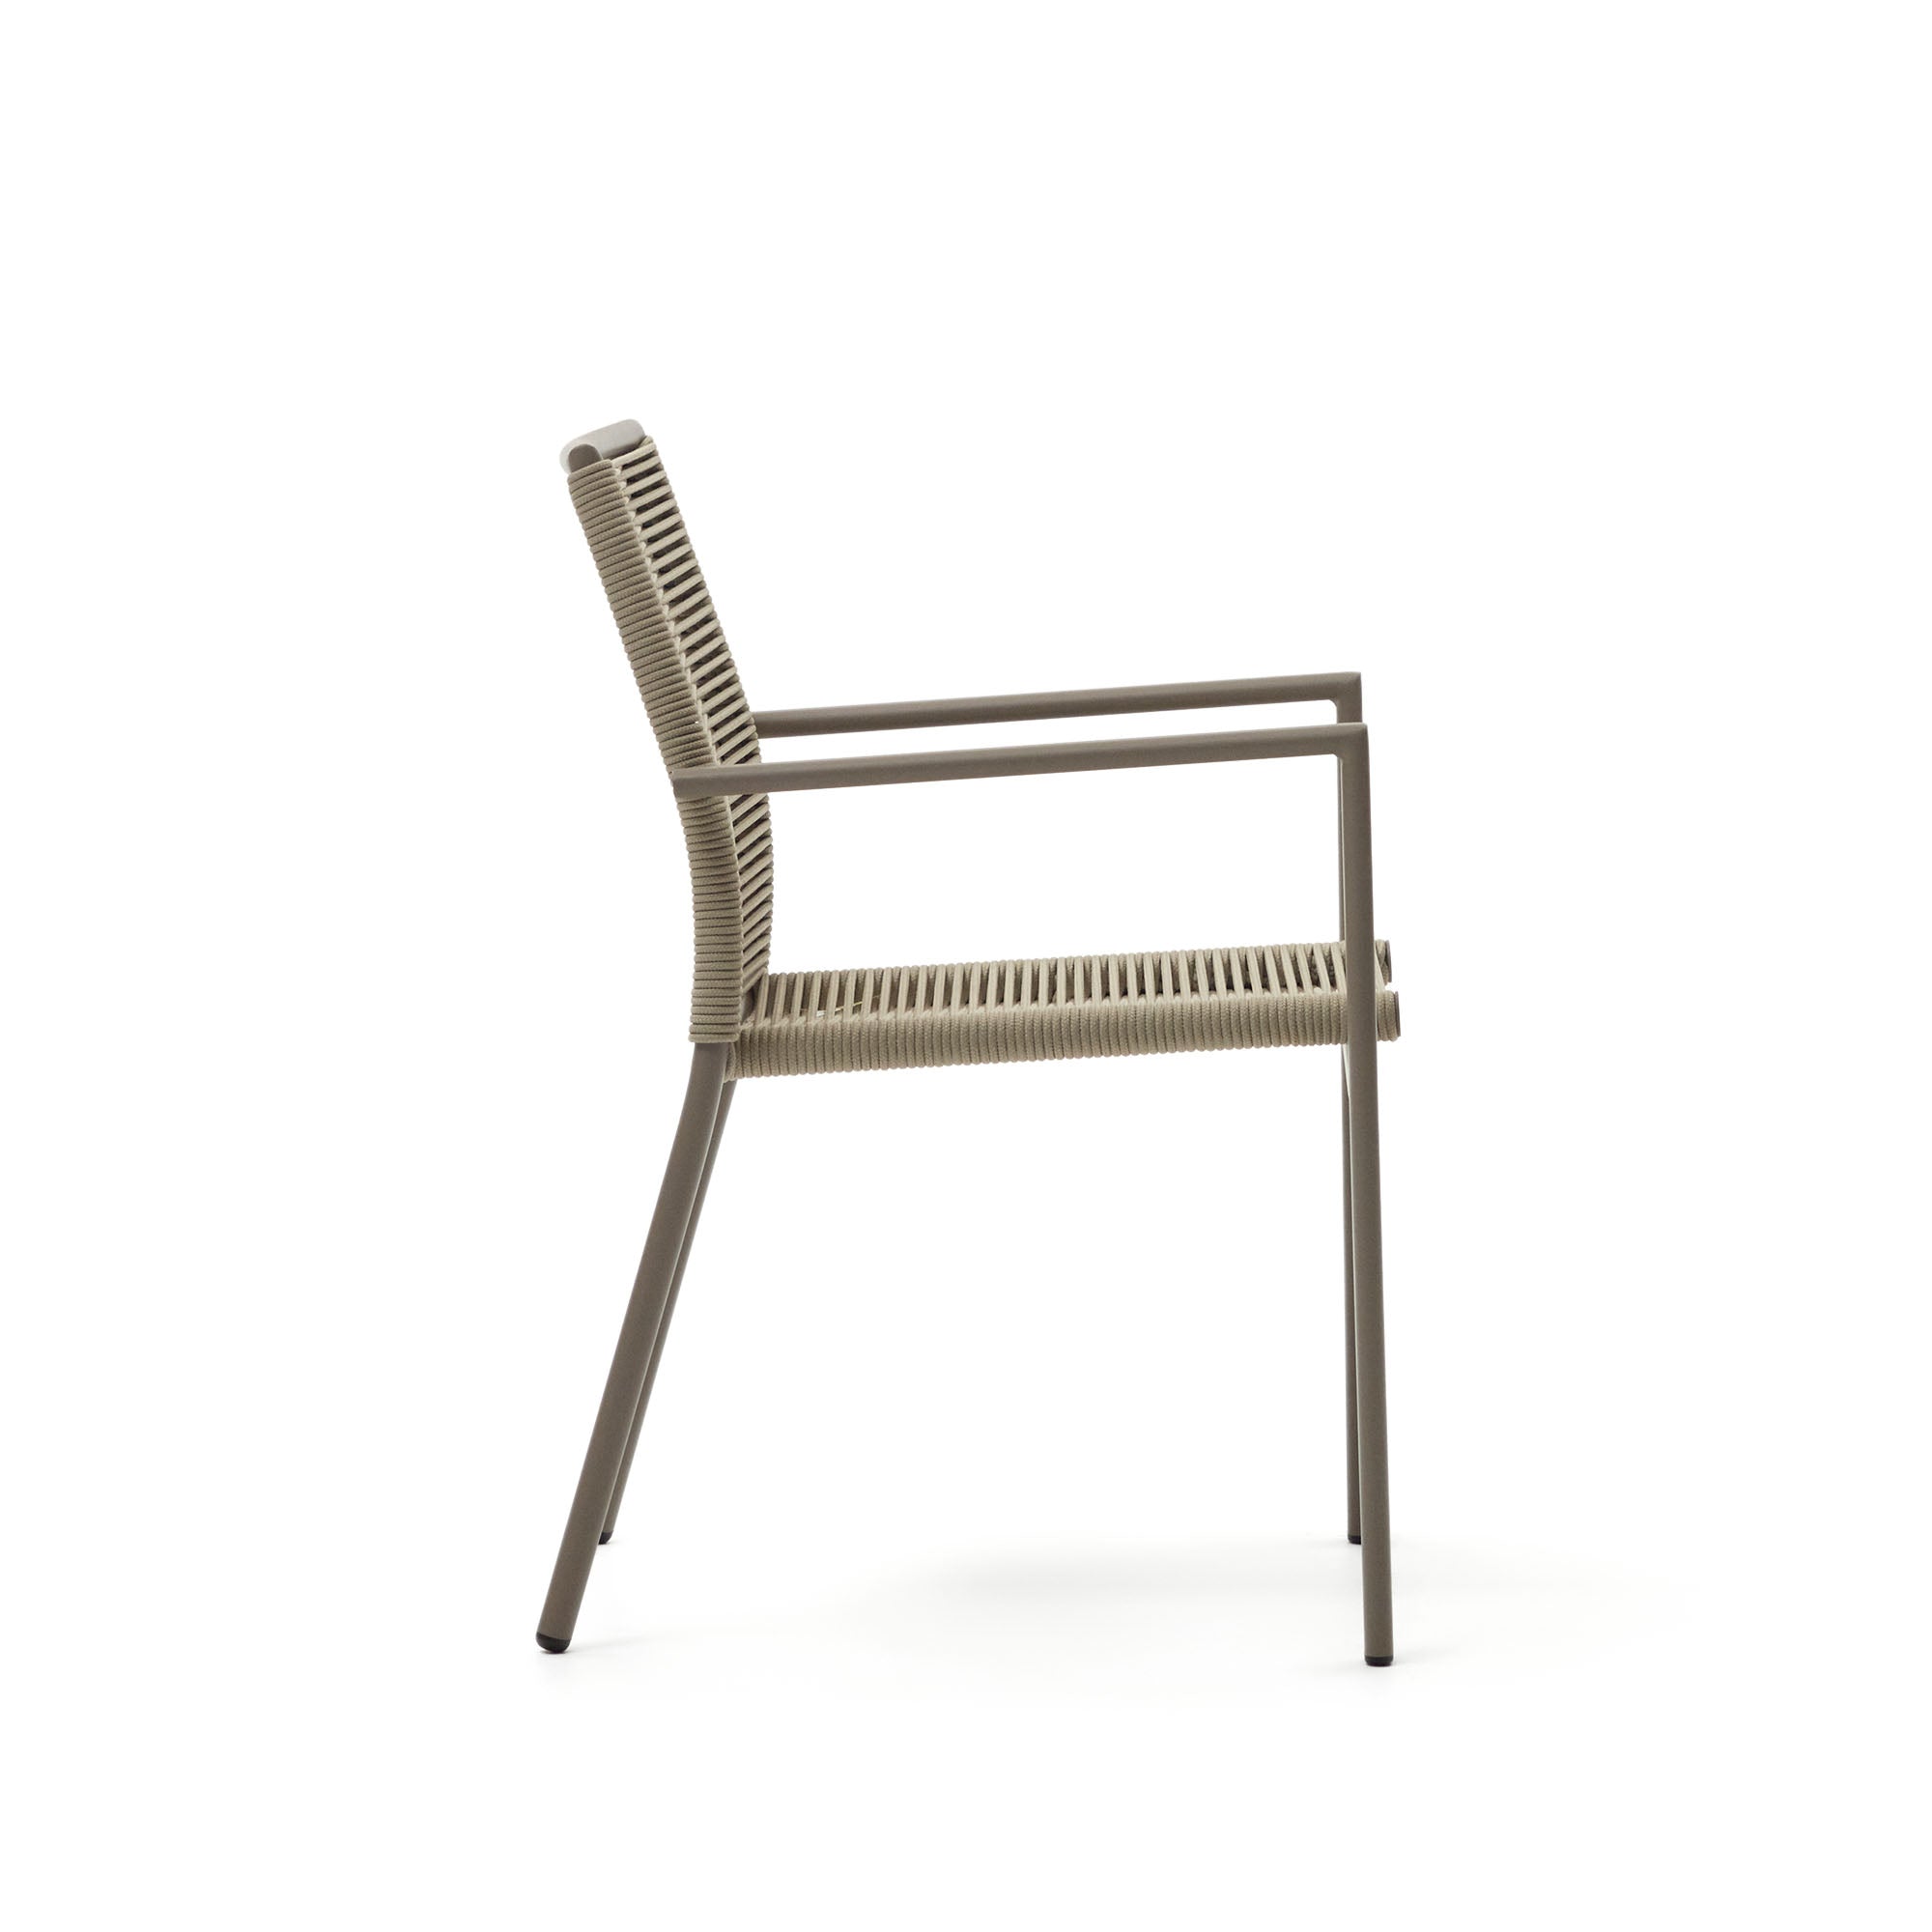 Culip aluminium and cord stackable outdoor chair in brown